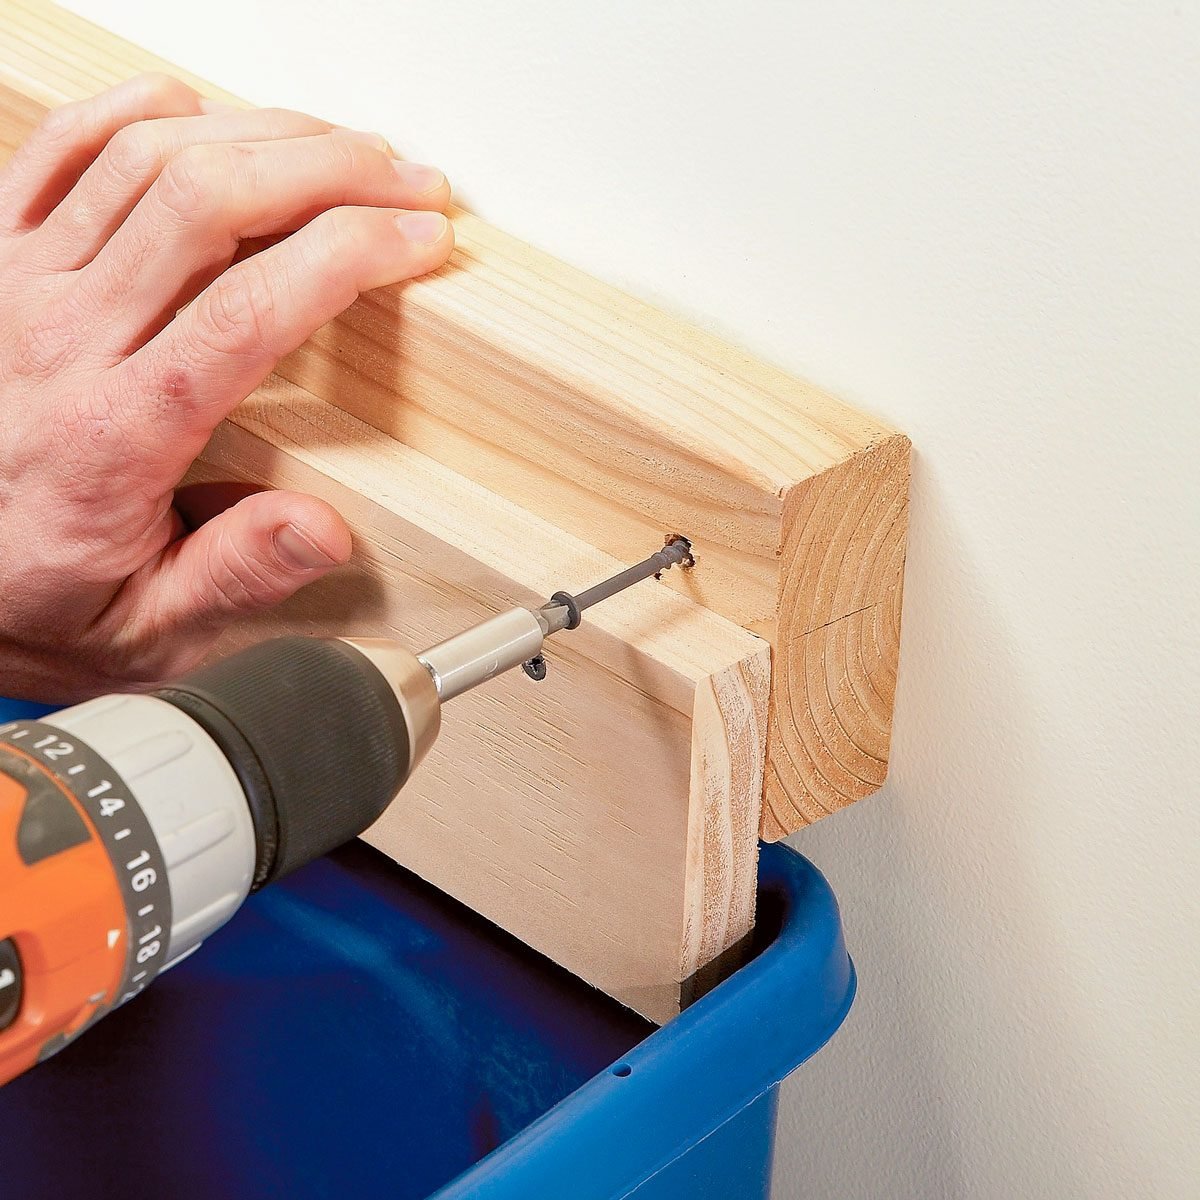 Fastening Screw into Wood with Drill, How To Make Hanging Recycling Bins For Your Garage